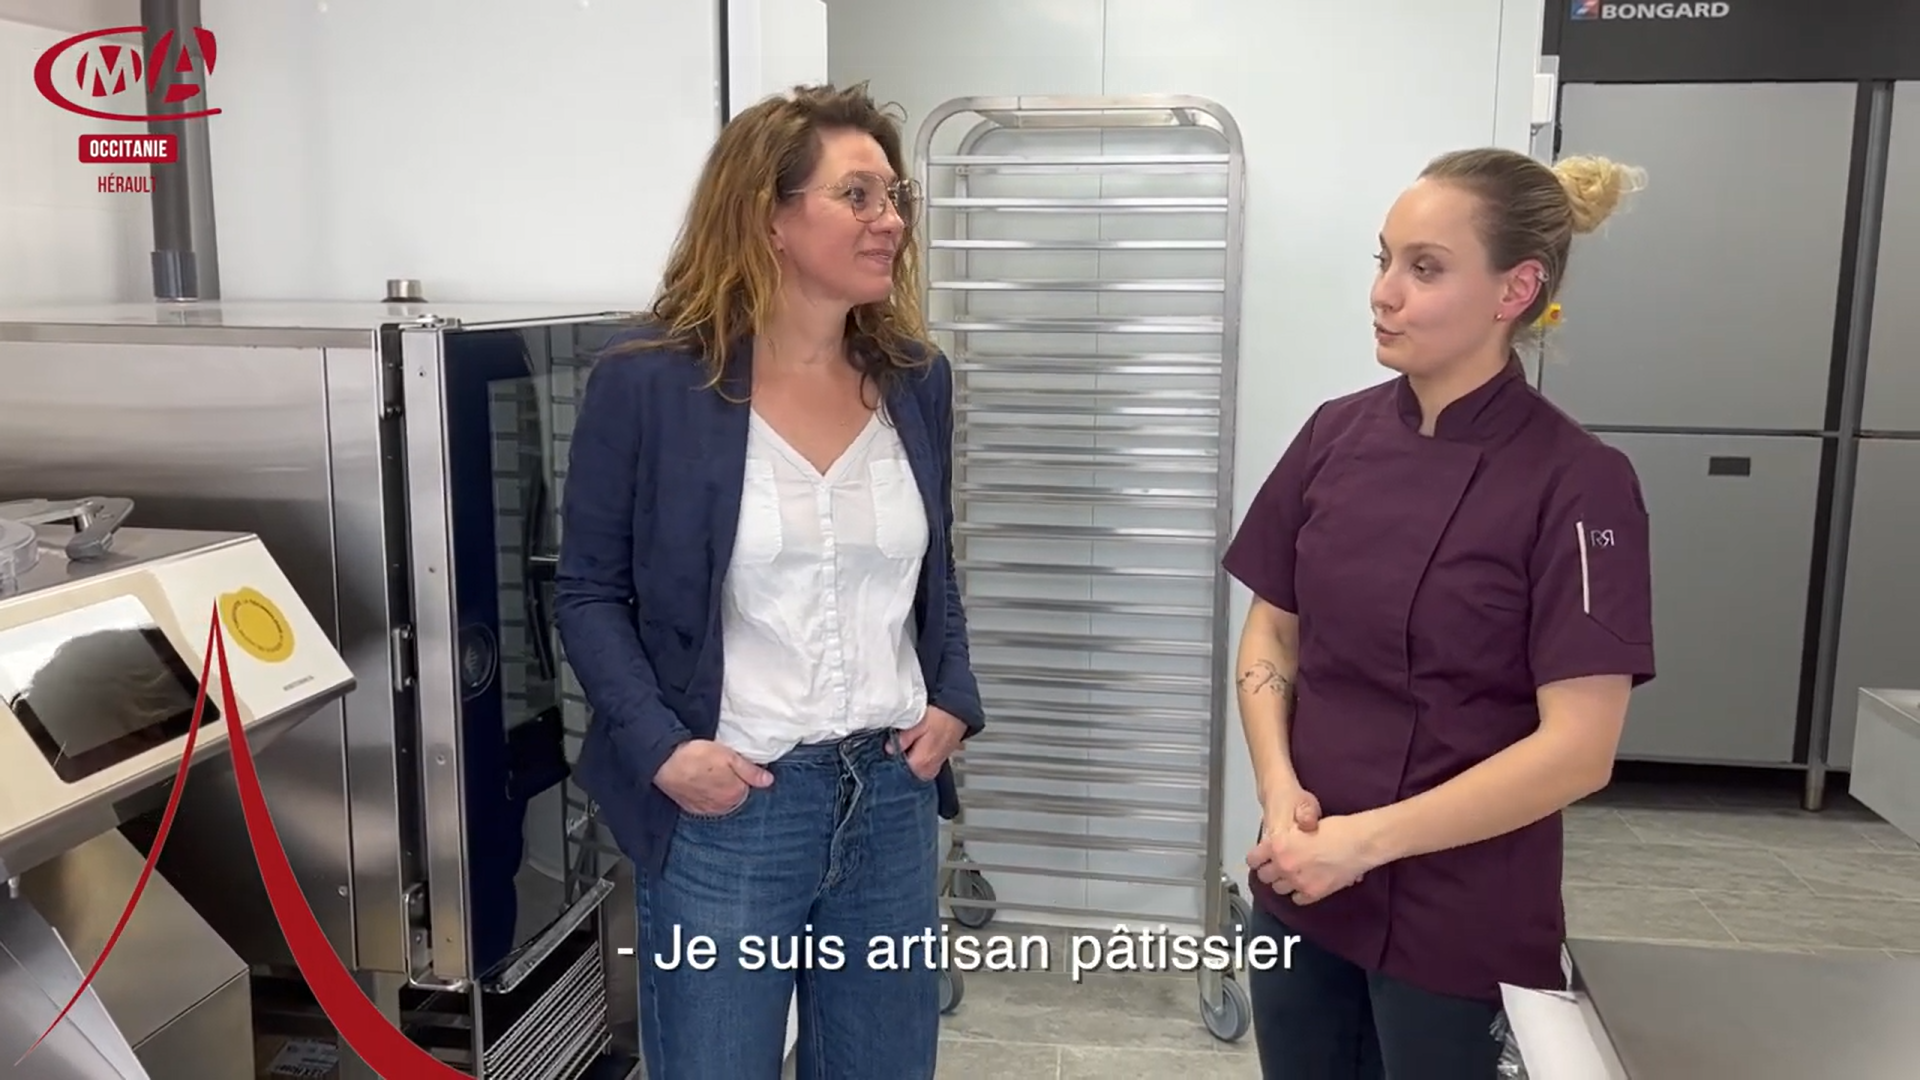 You are currently viewing Rencontres Artisanes avec Florence Bonno